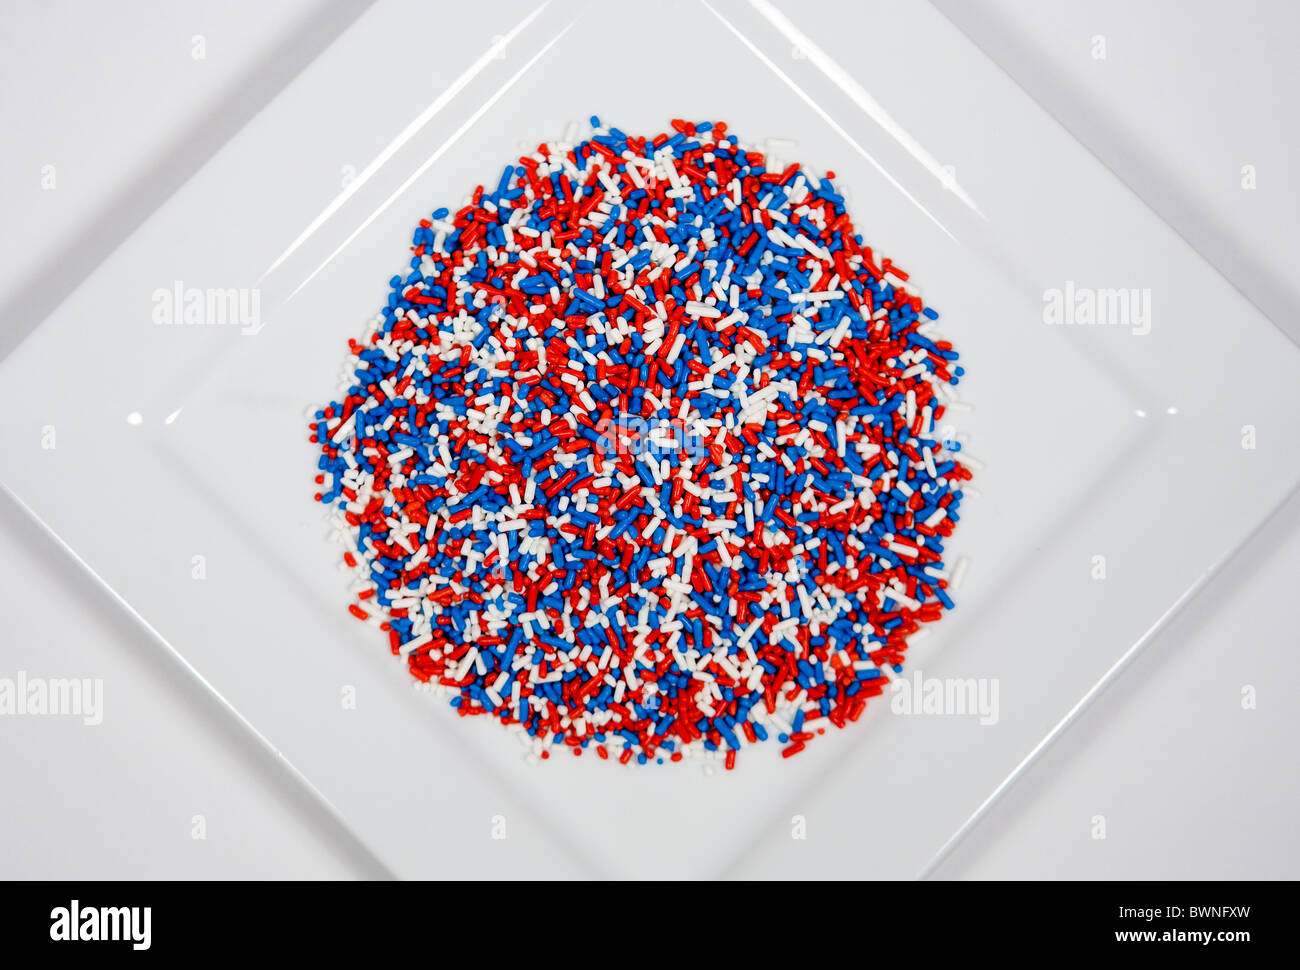 Red, white and blue sprinkles.  Stock Photo